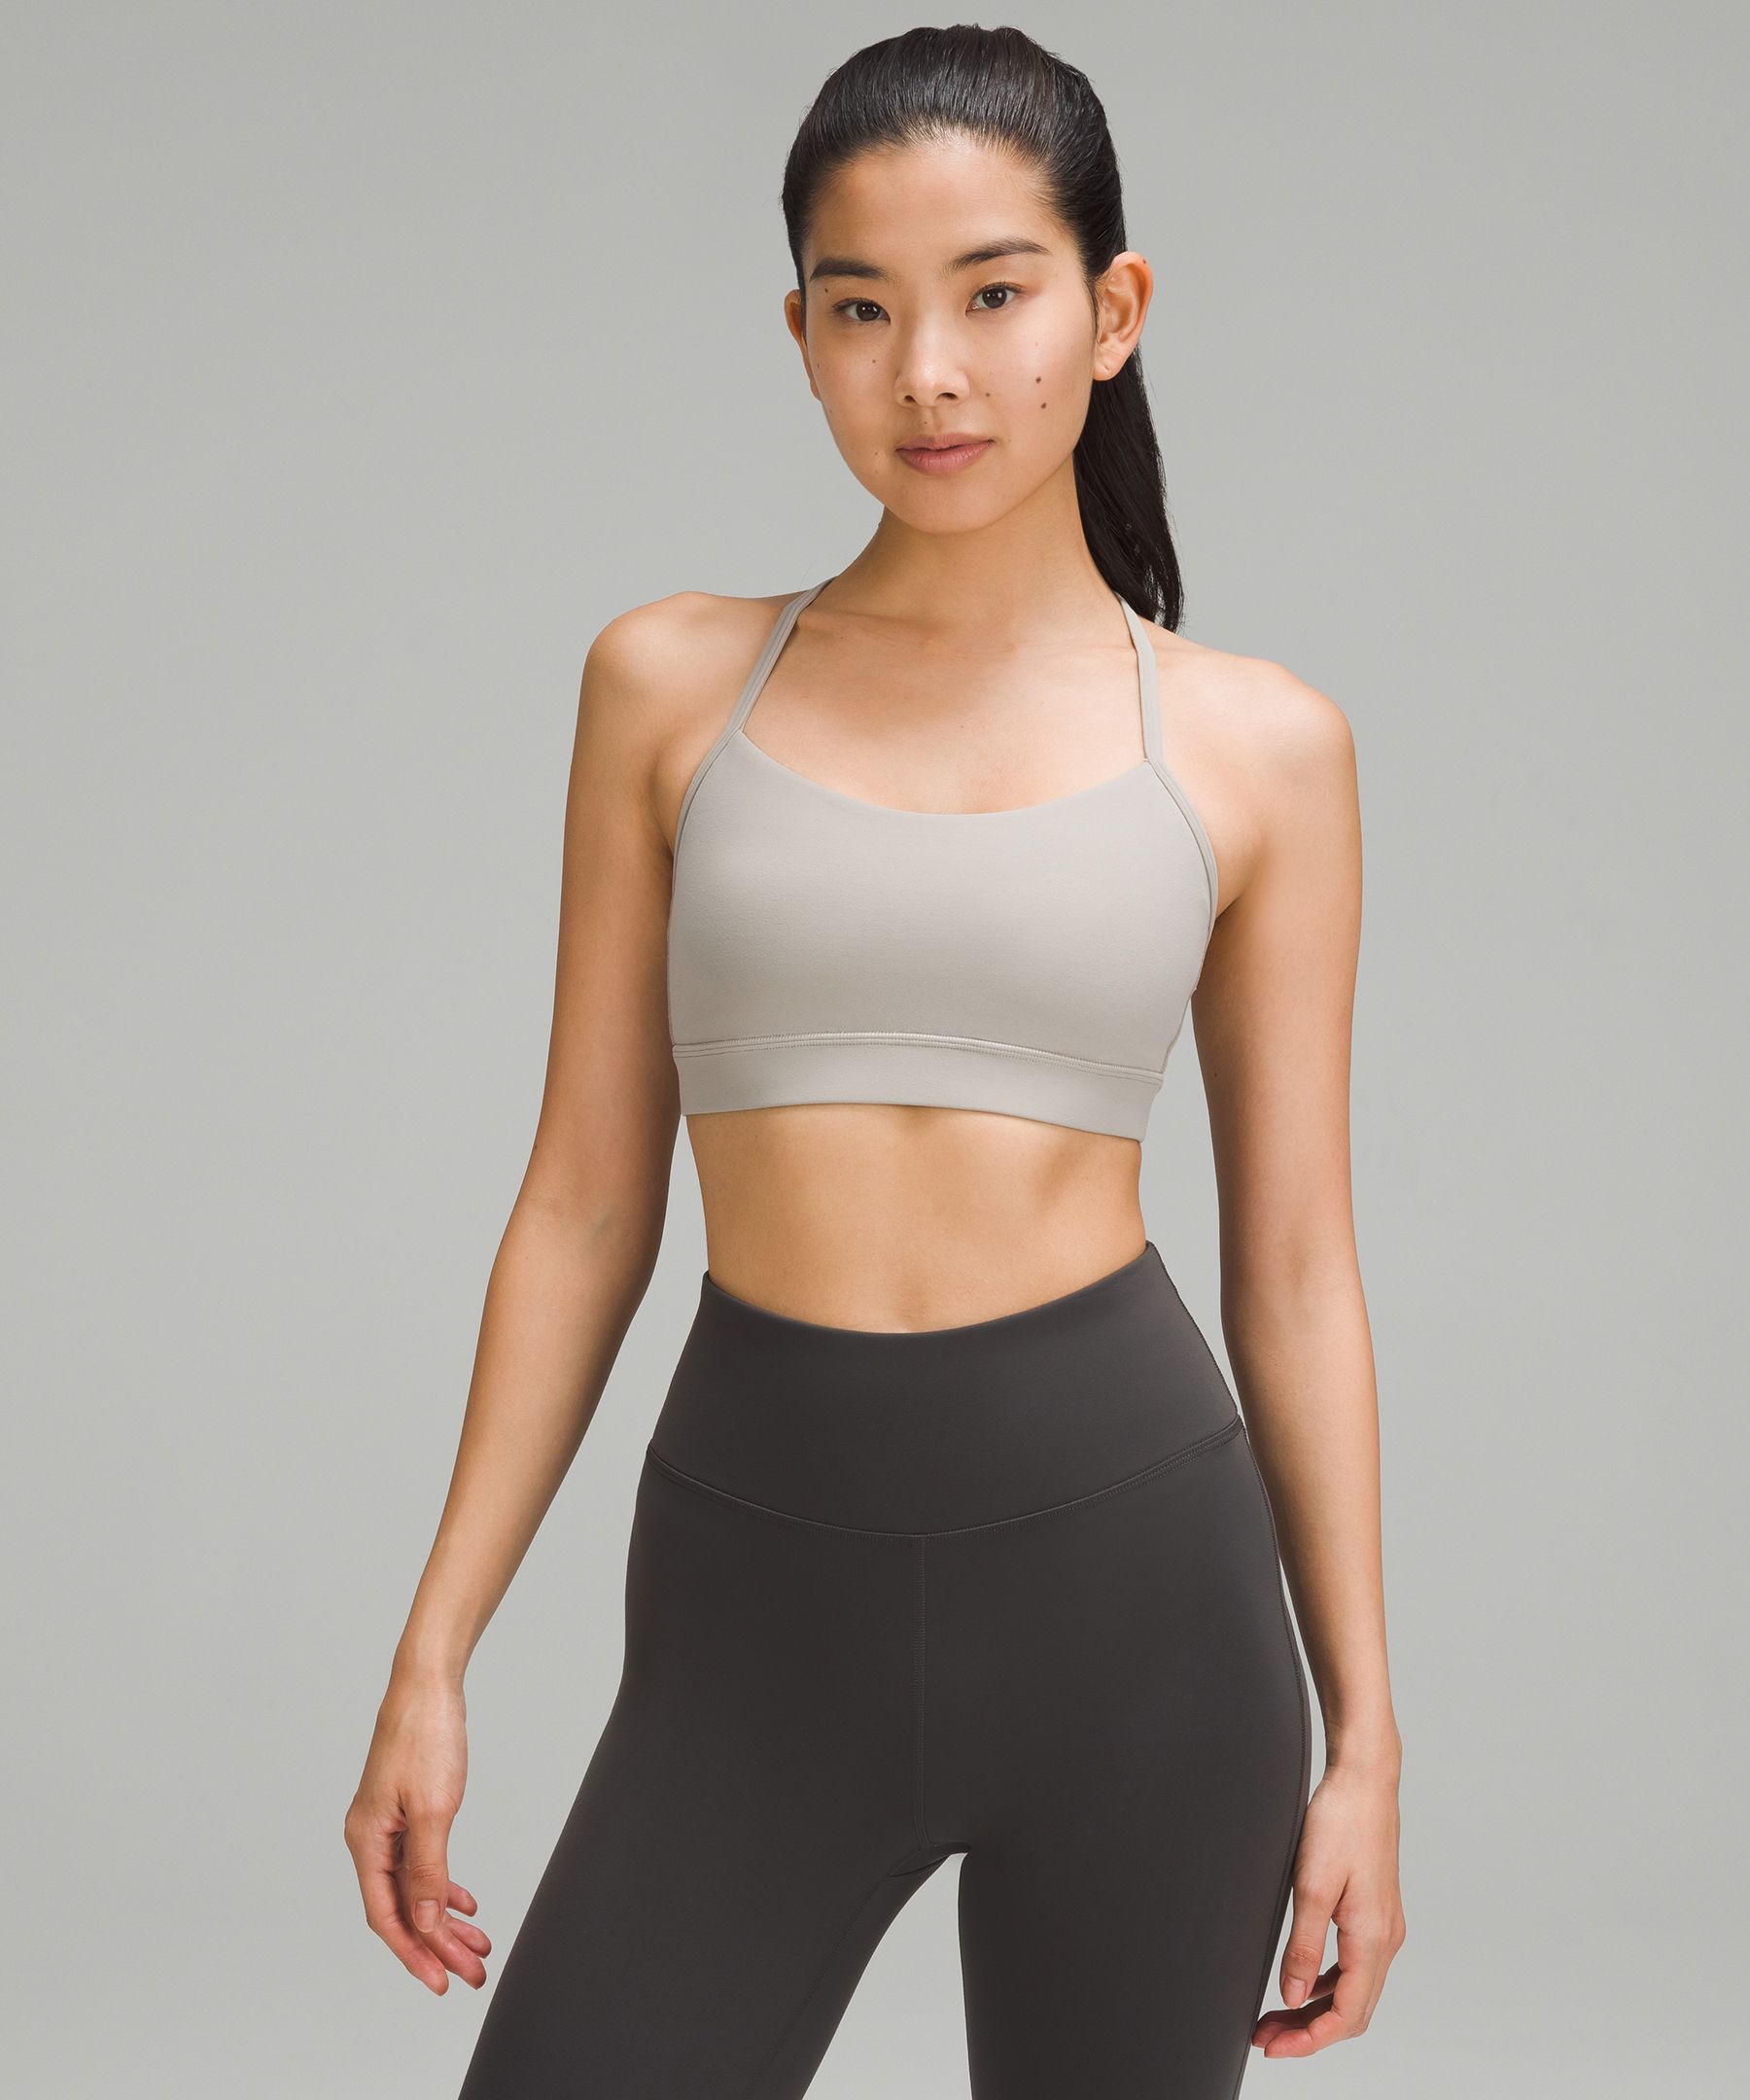 Running Gym Women Clothes Slim Fit Waist Length Nulu Cropped